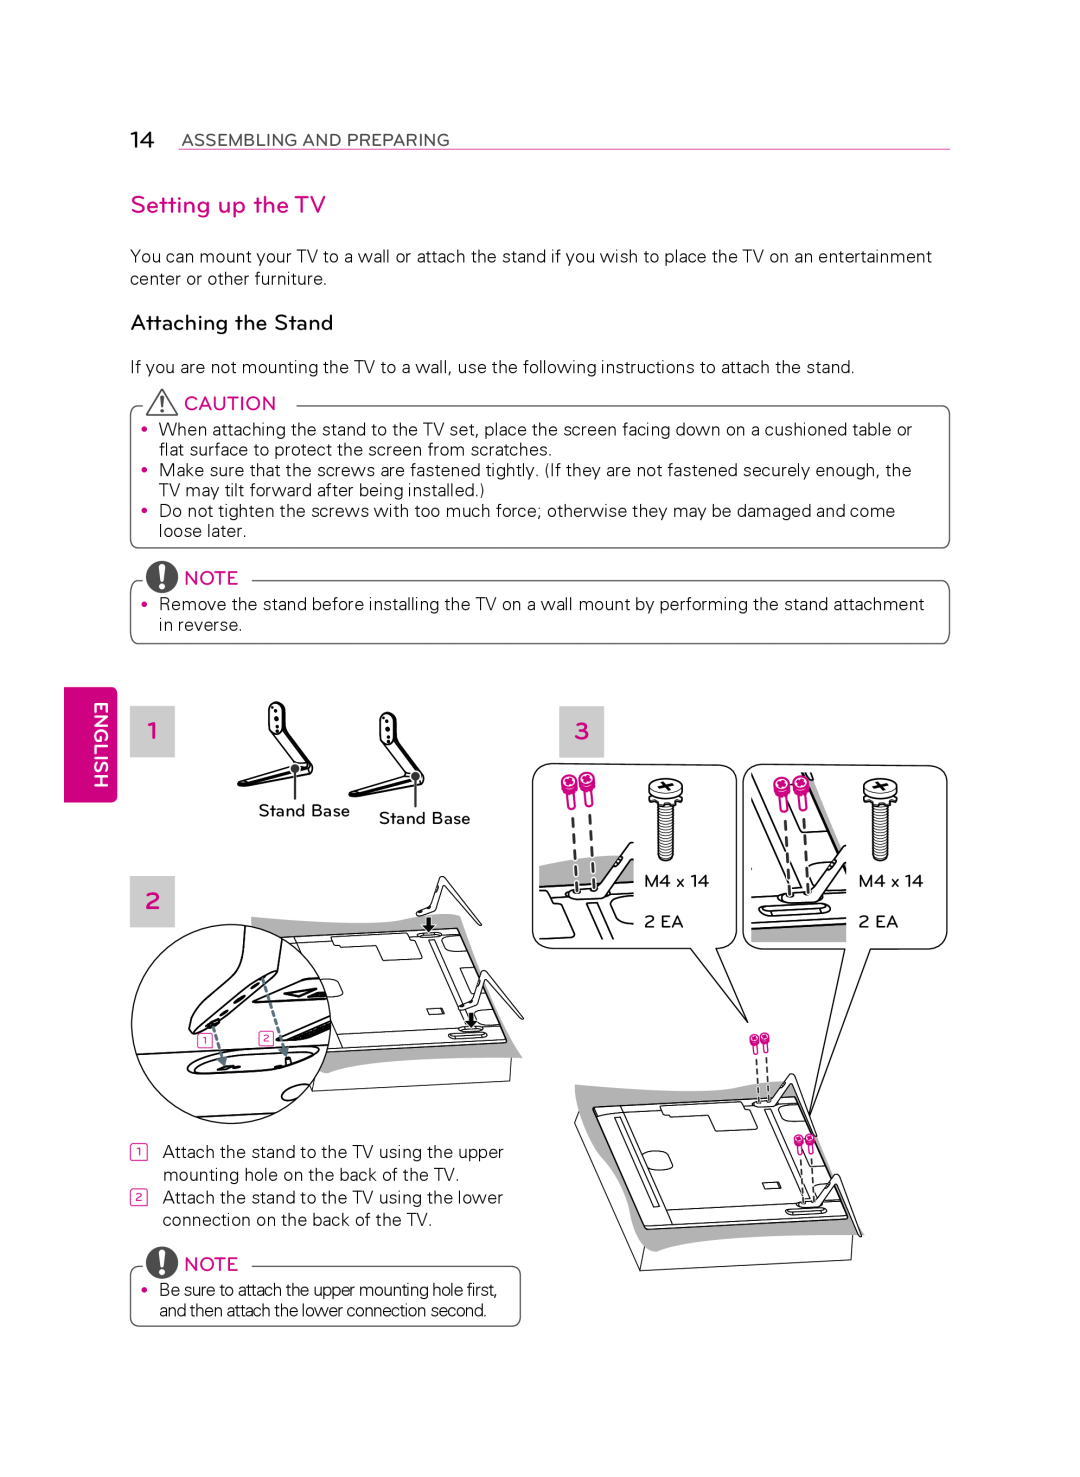 LG Electronics 55LA9650 owner manual Setting up the TV, Attaching the stand, English, Assembling And Preparing 